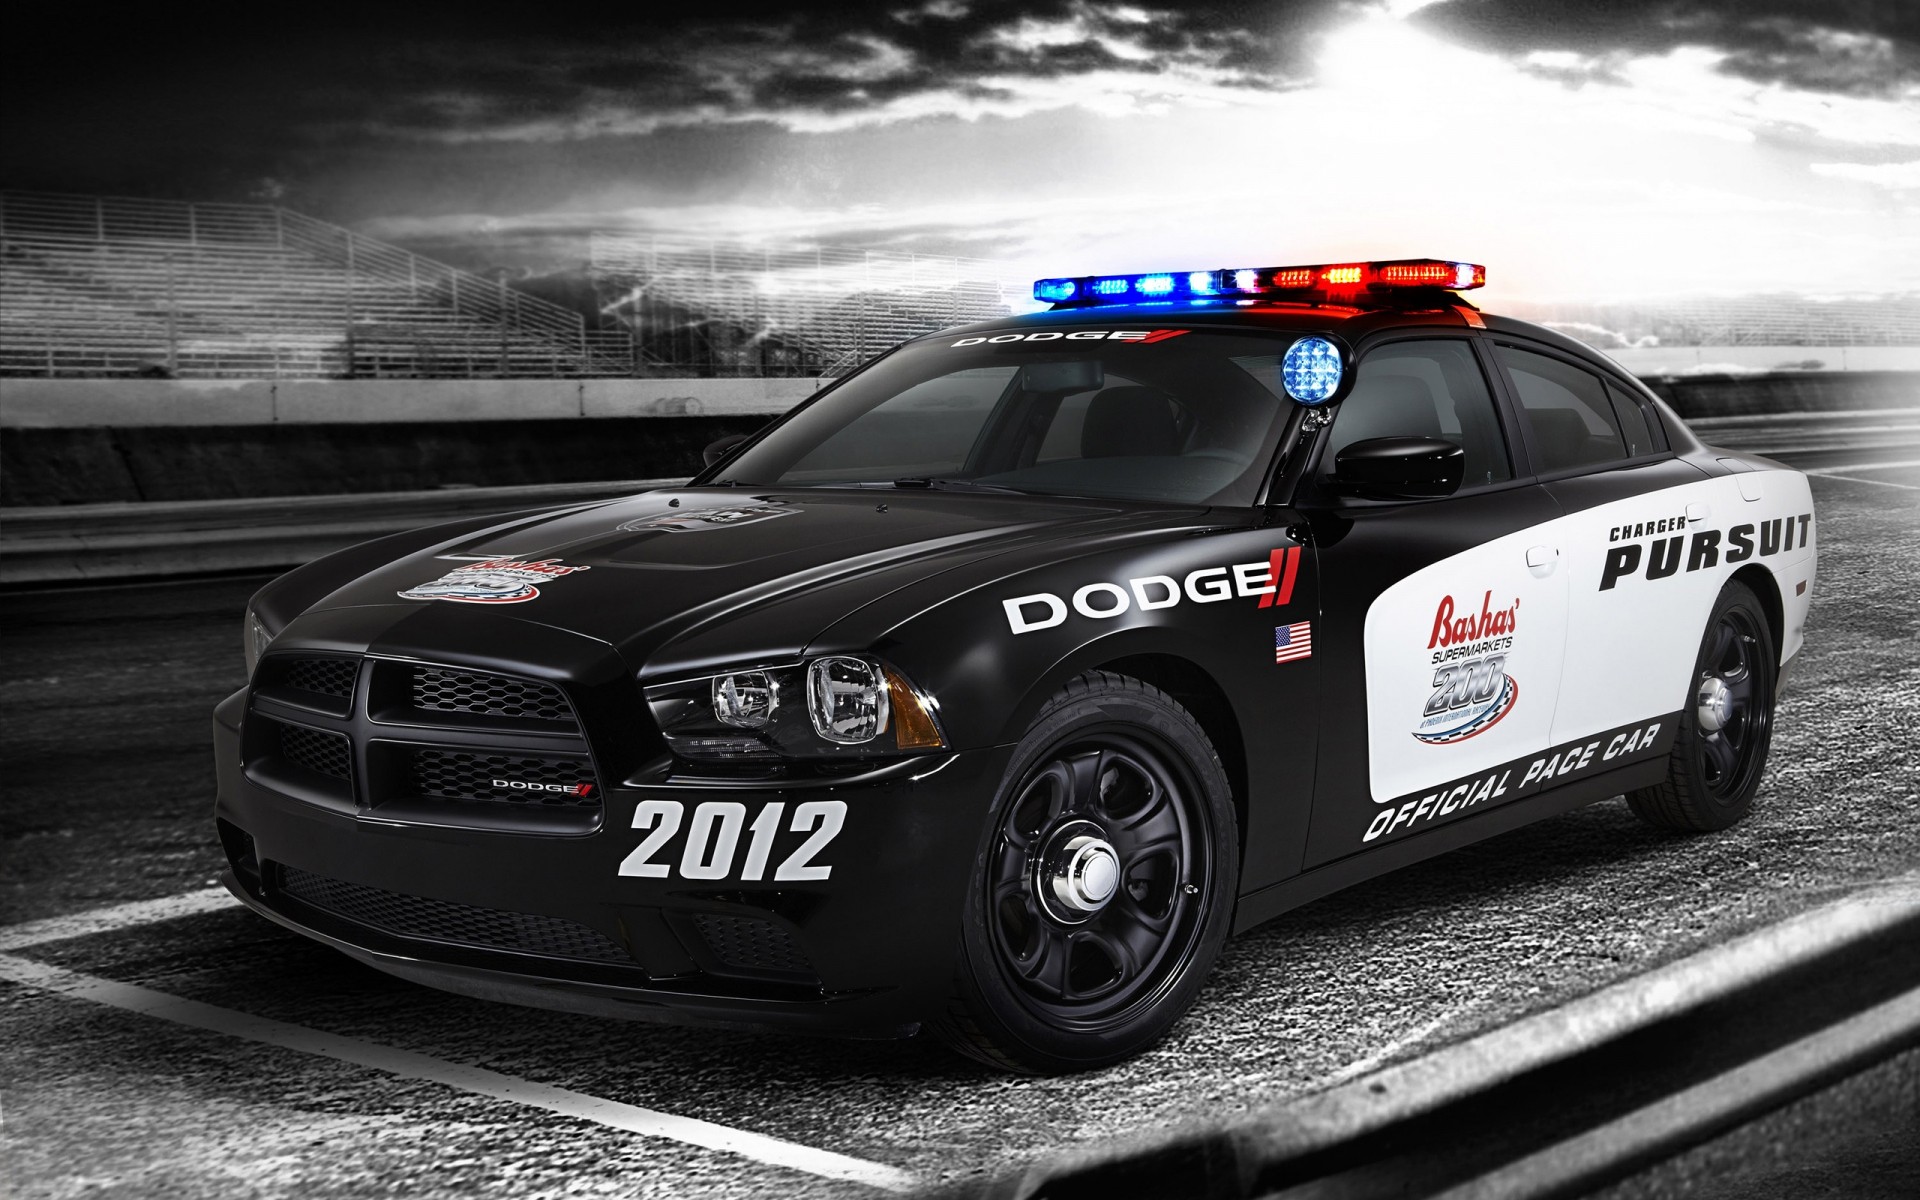 Dodge Car Race Vehicle Fast Competition Hurry Championship - Dodge Police Interceptor - HD Wallpaper 